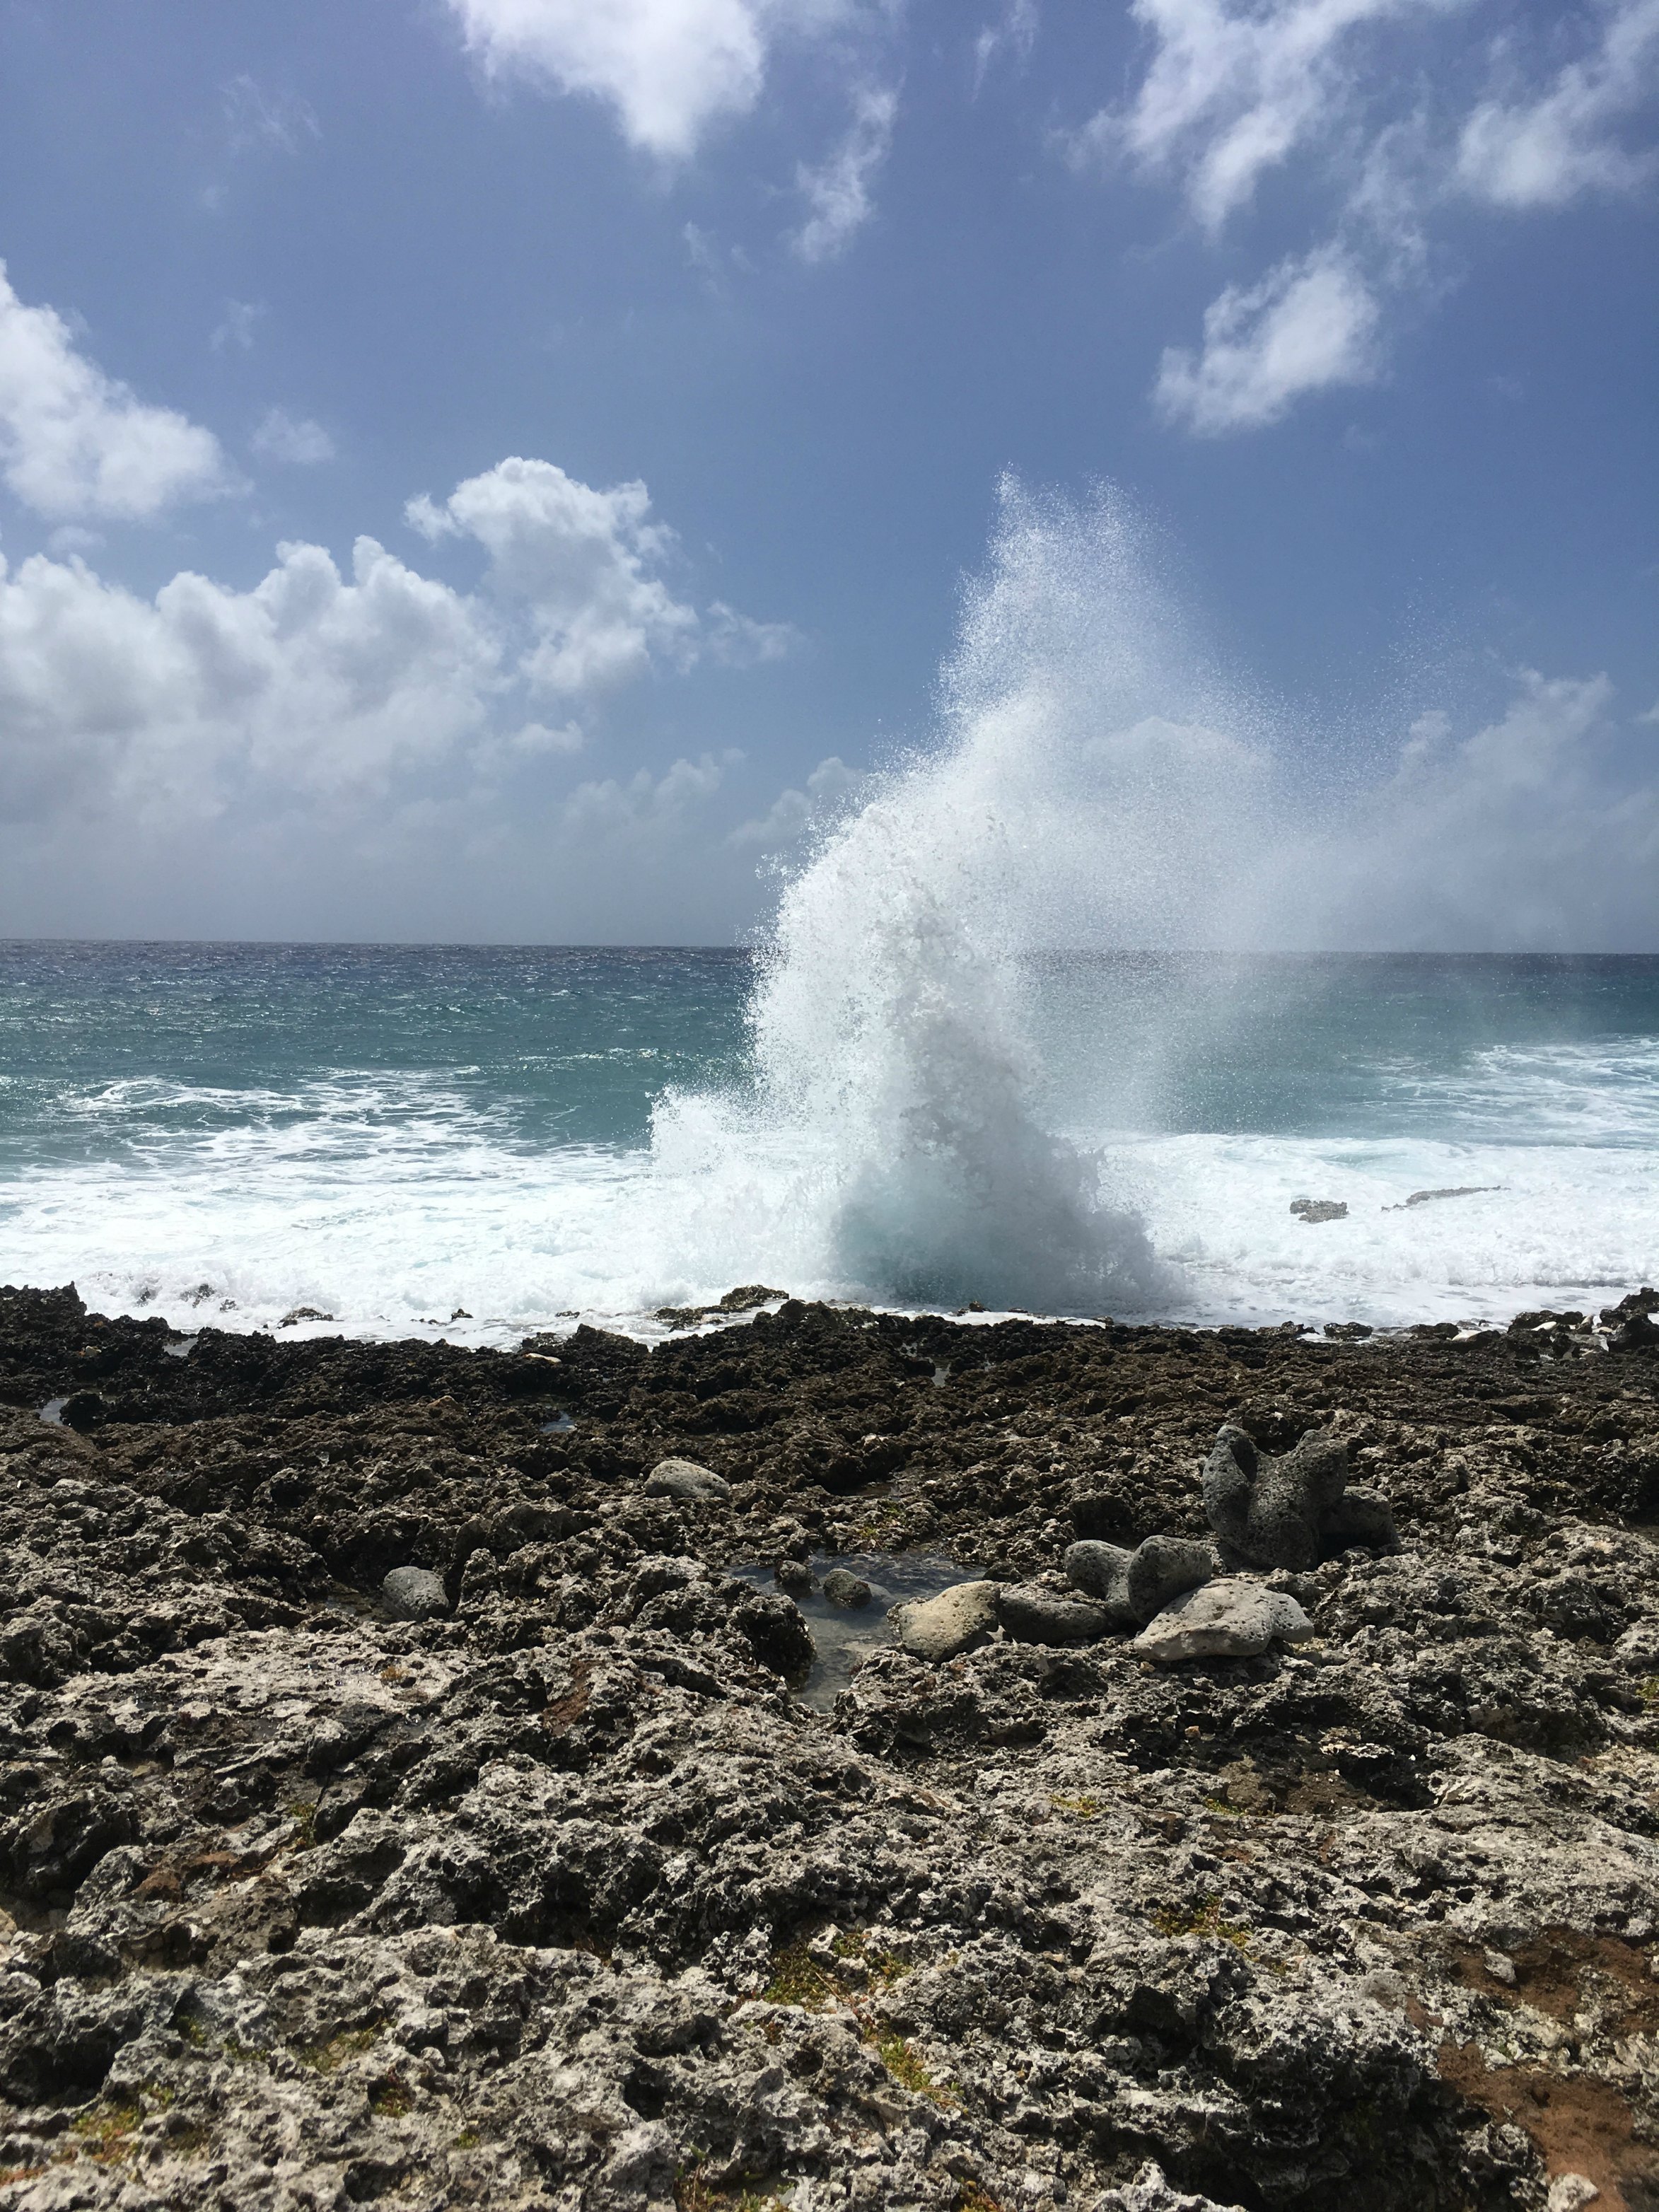 The Blowholes in Grand Cayman